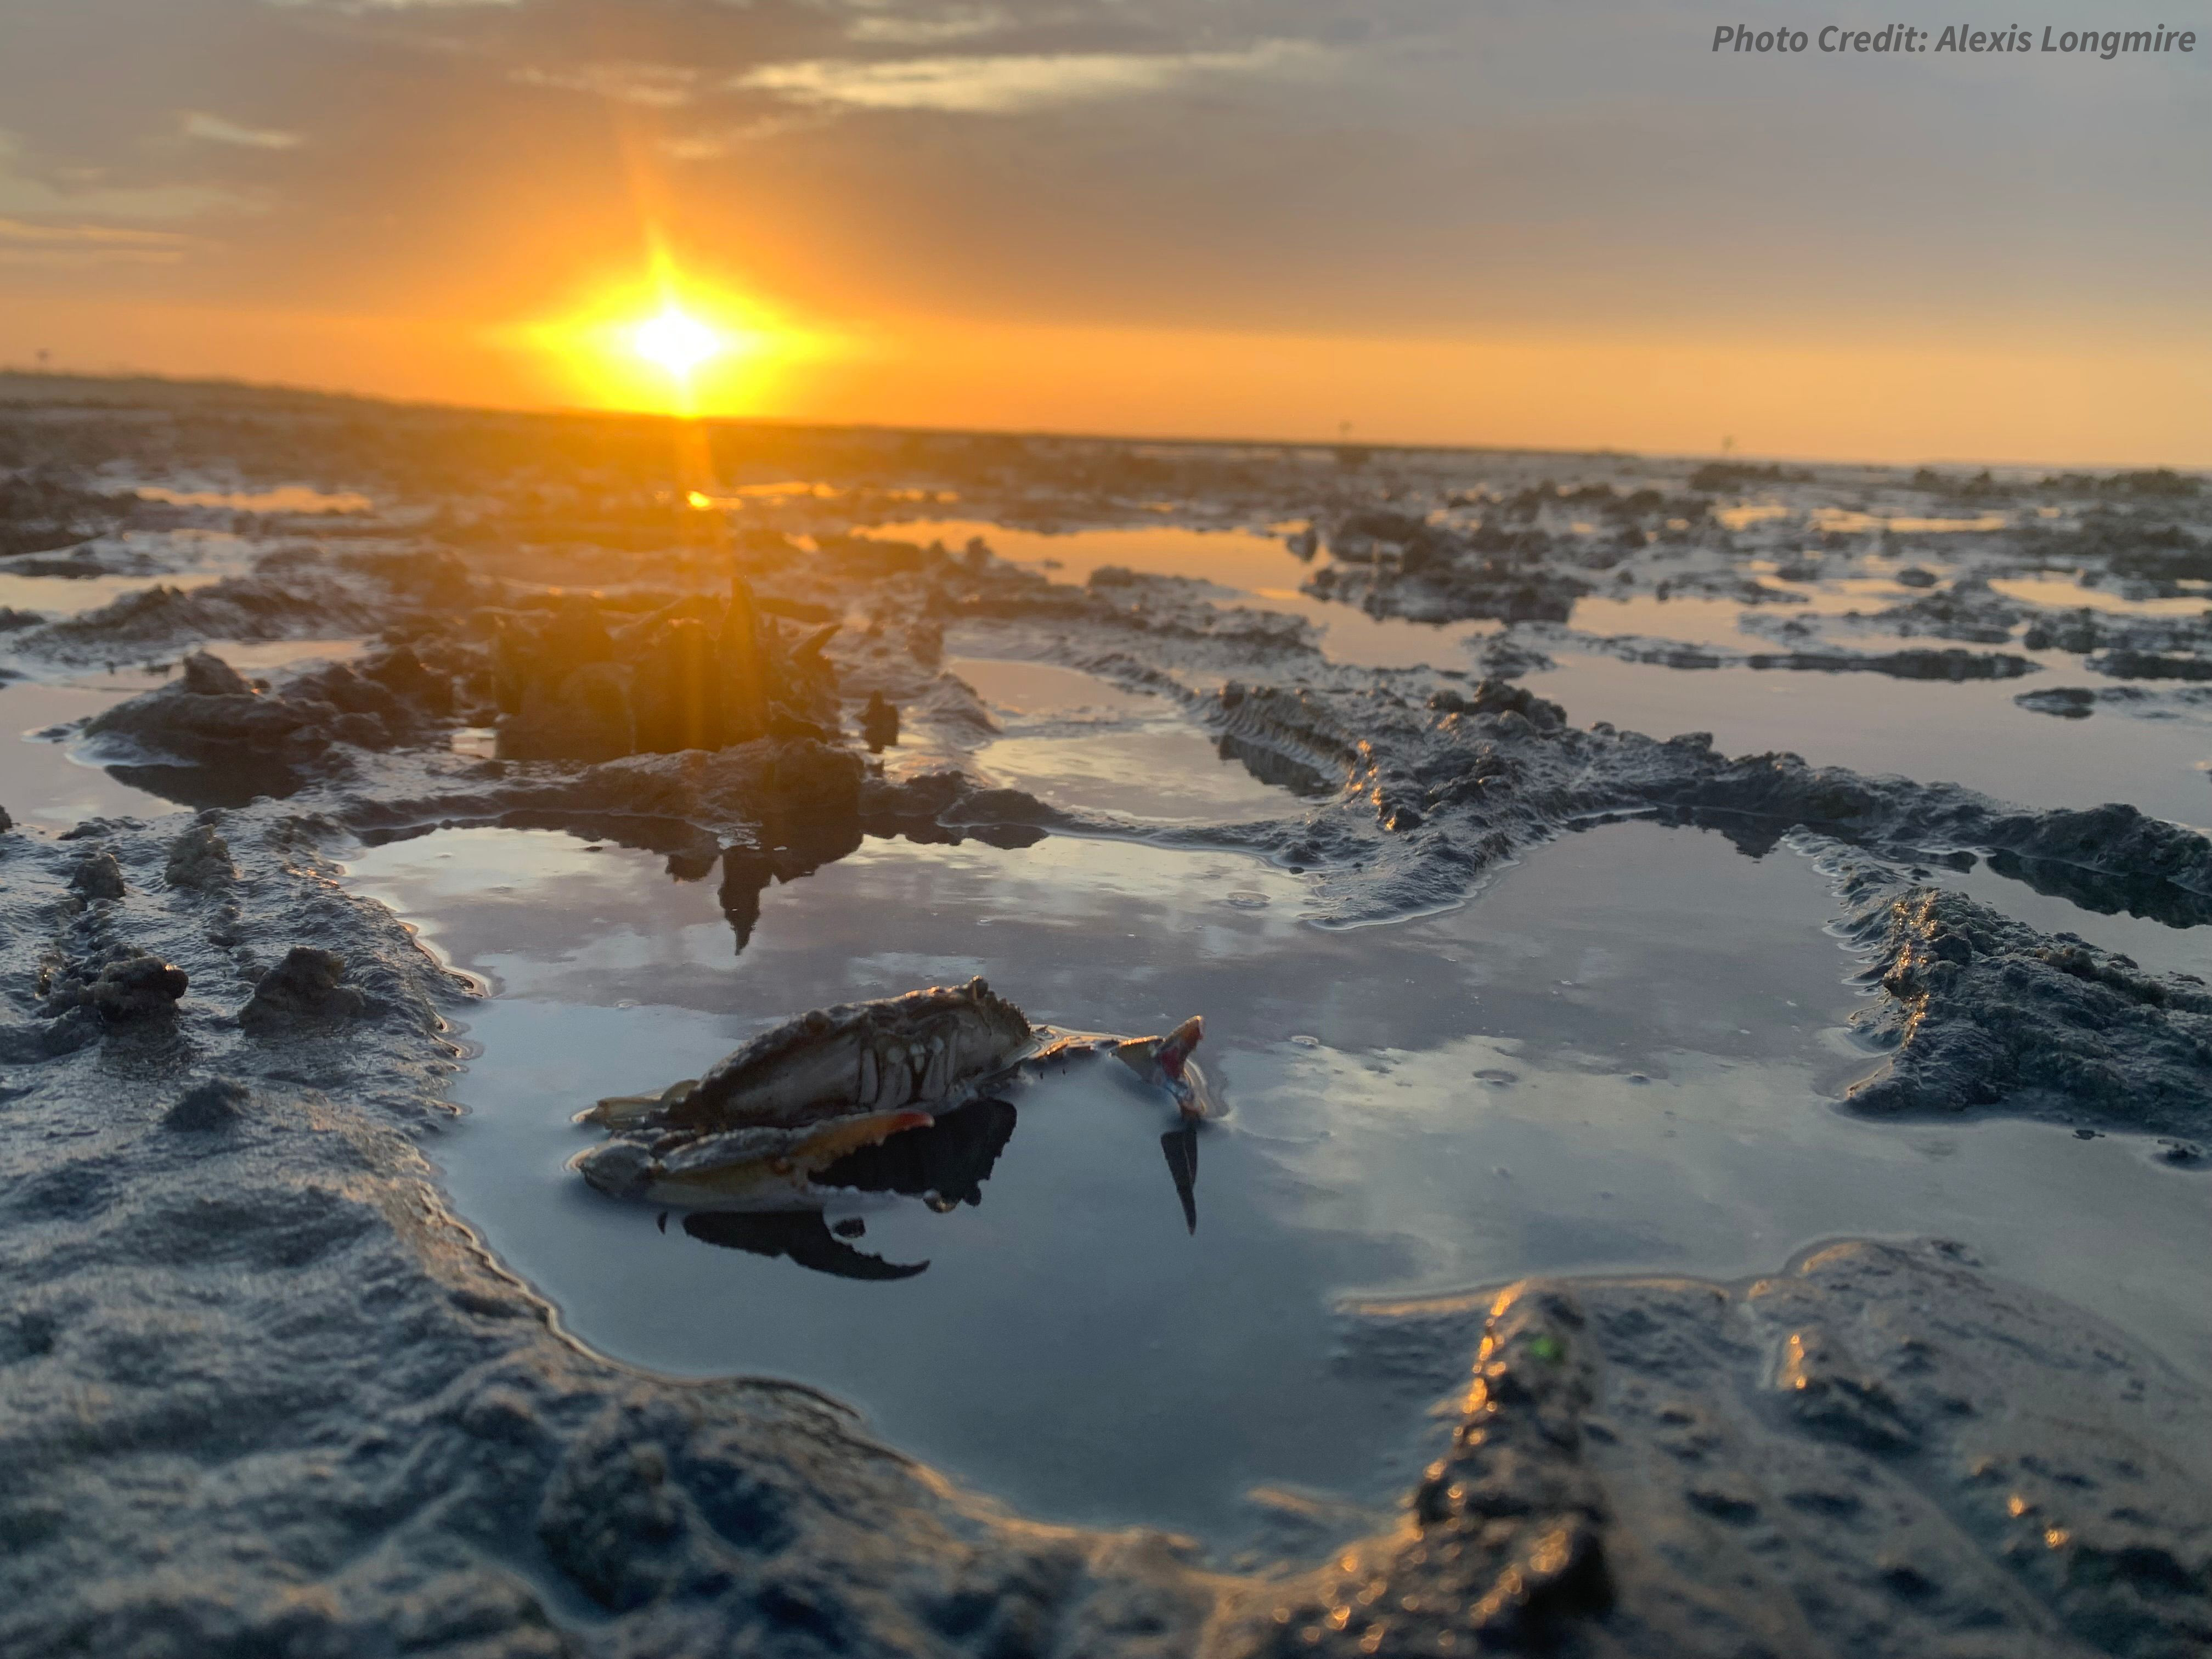 A crab pokes out of the water in a rock formation with the sun rising in the distance.